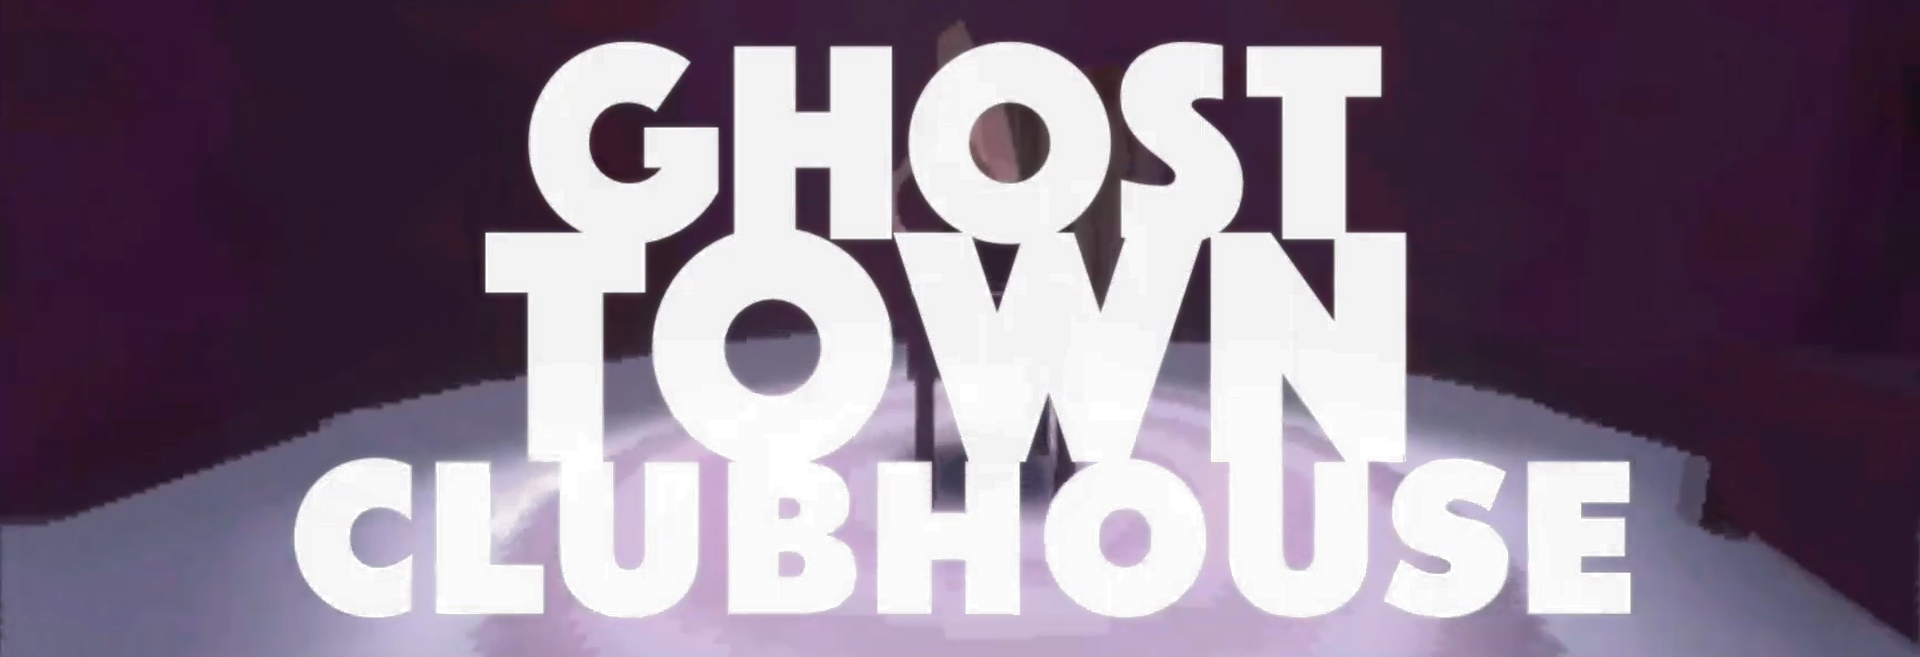 Ghost Town Clubhouse